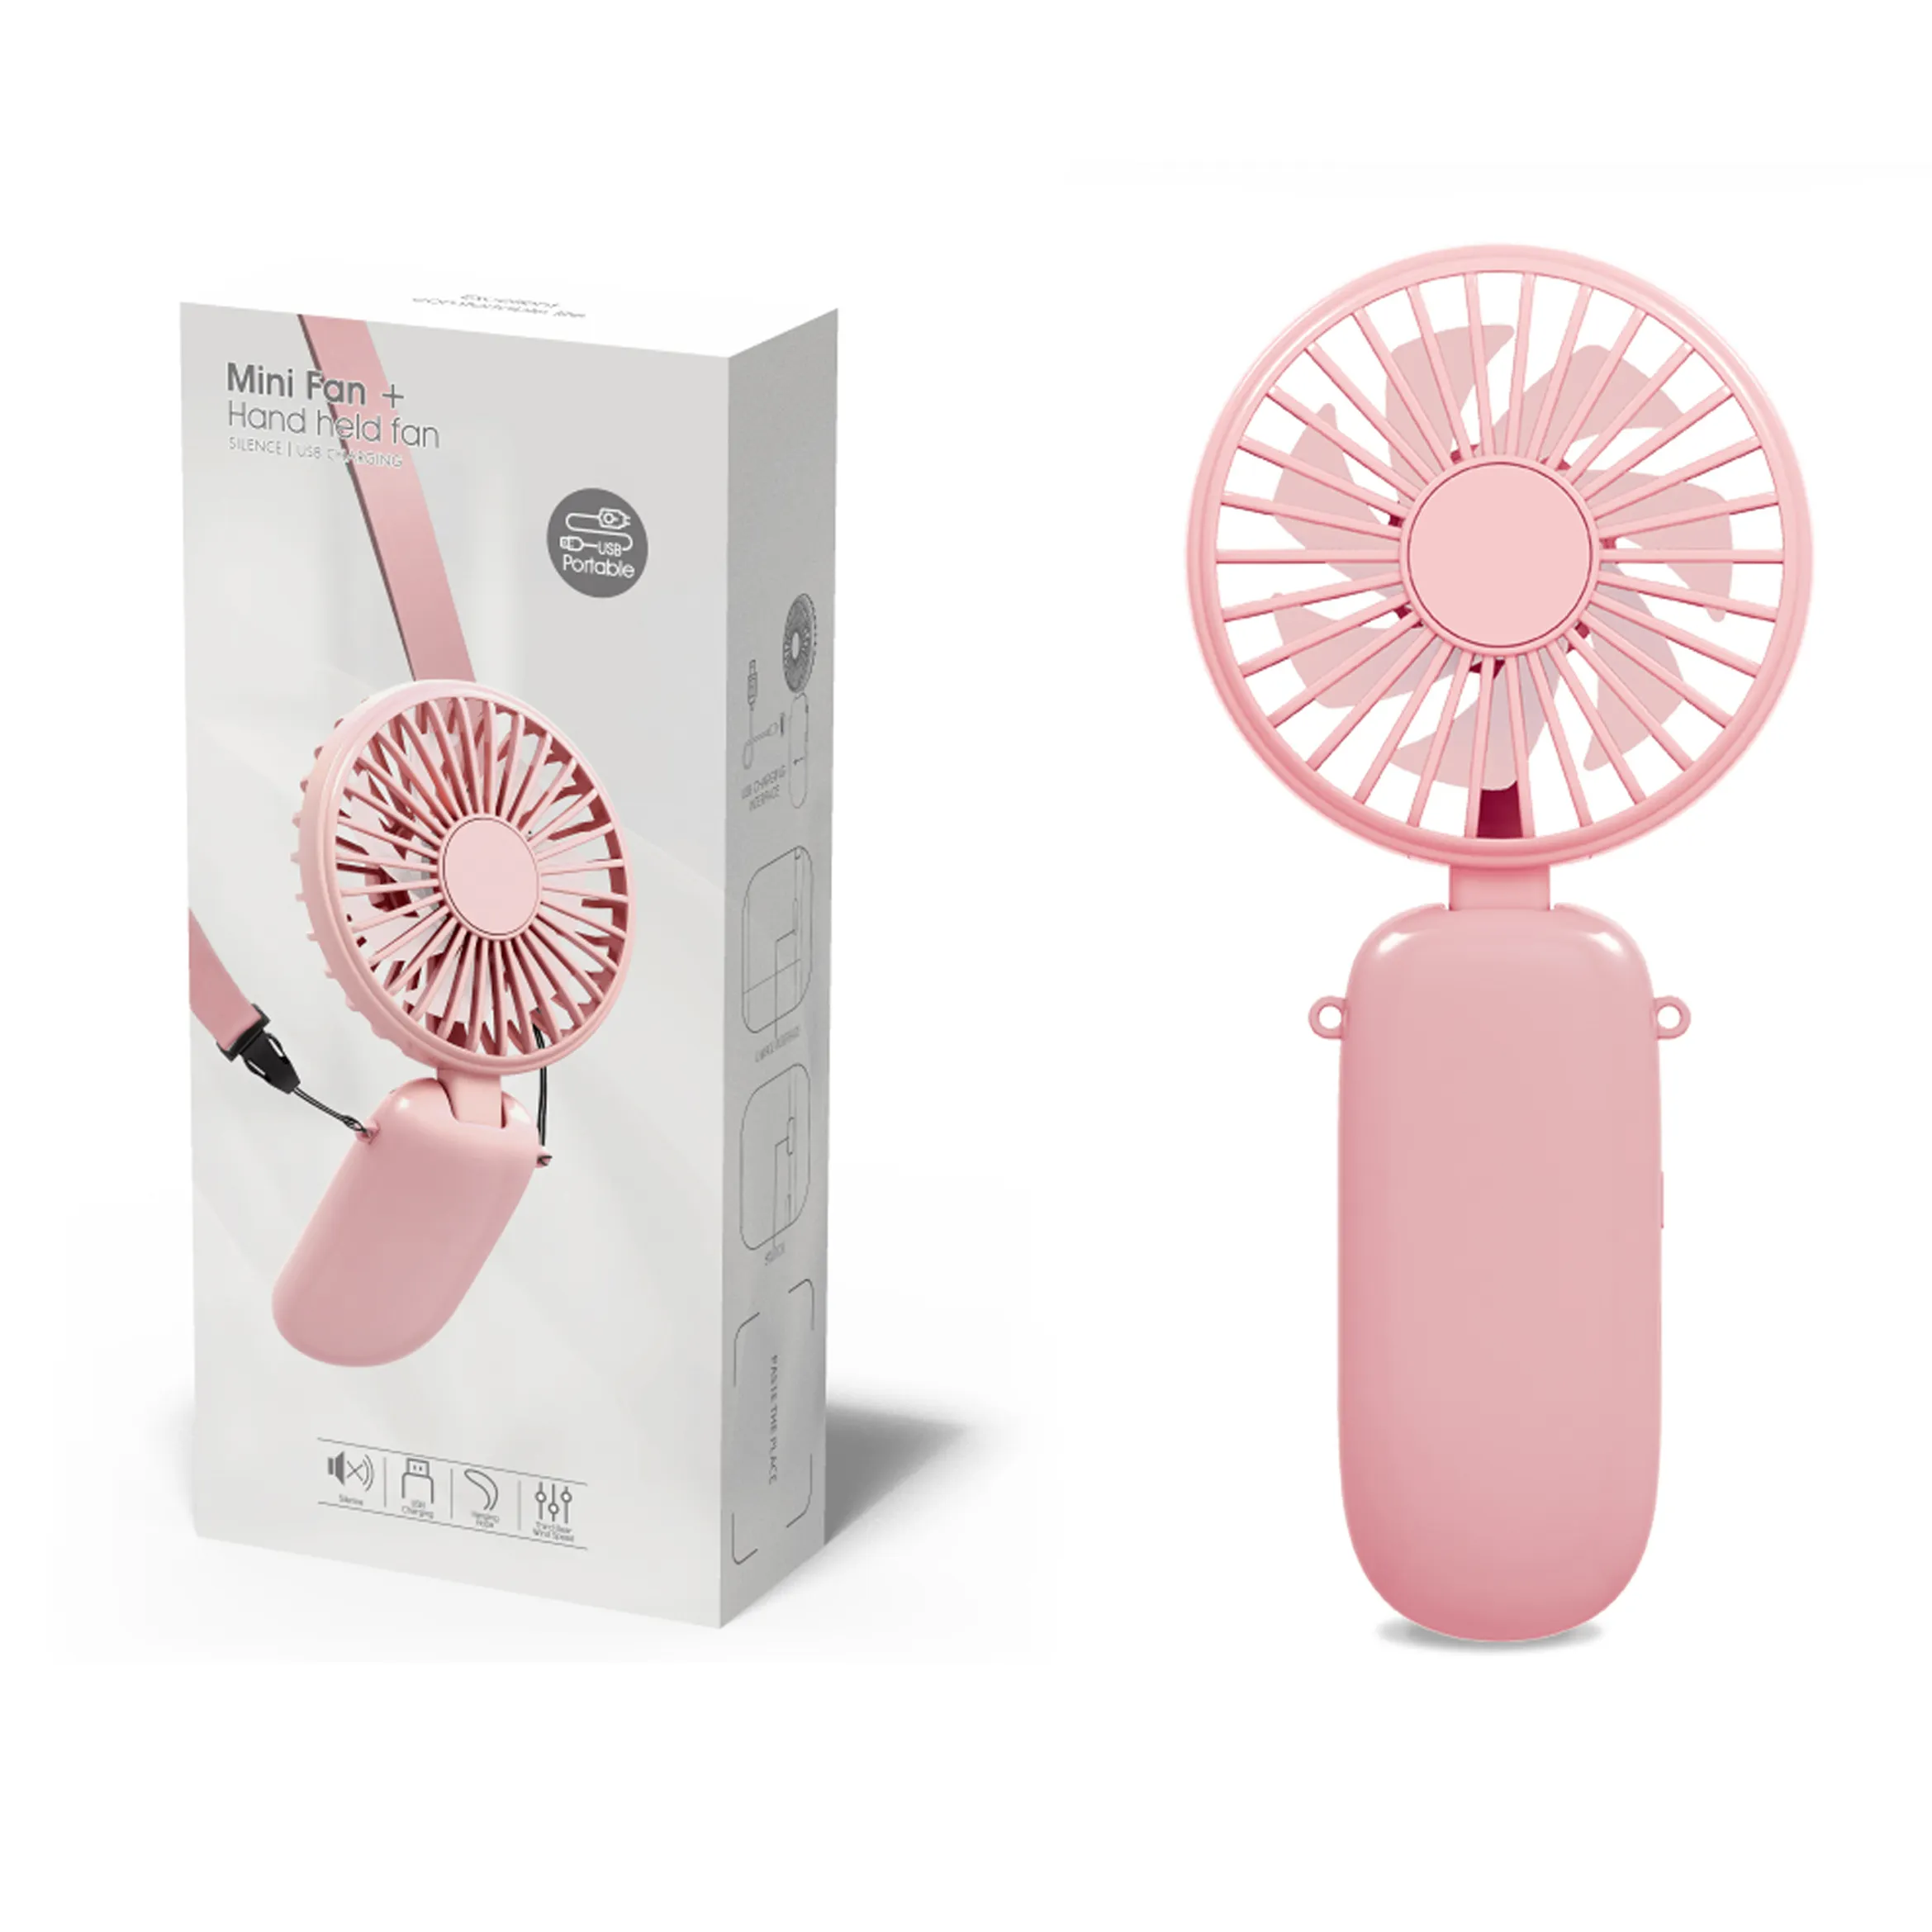 Custom hanging neck fan handheld foldable charging fan for easy carrying in travel dormitory